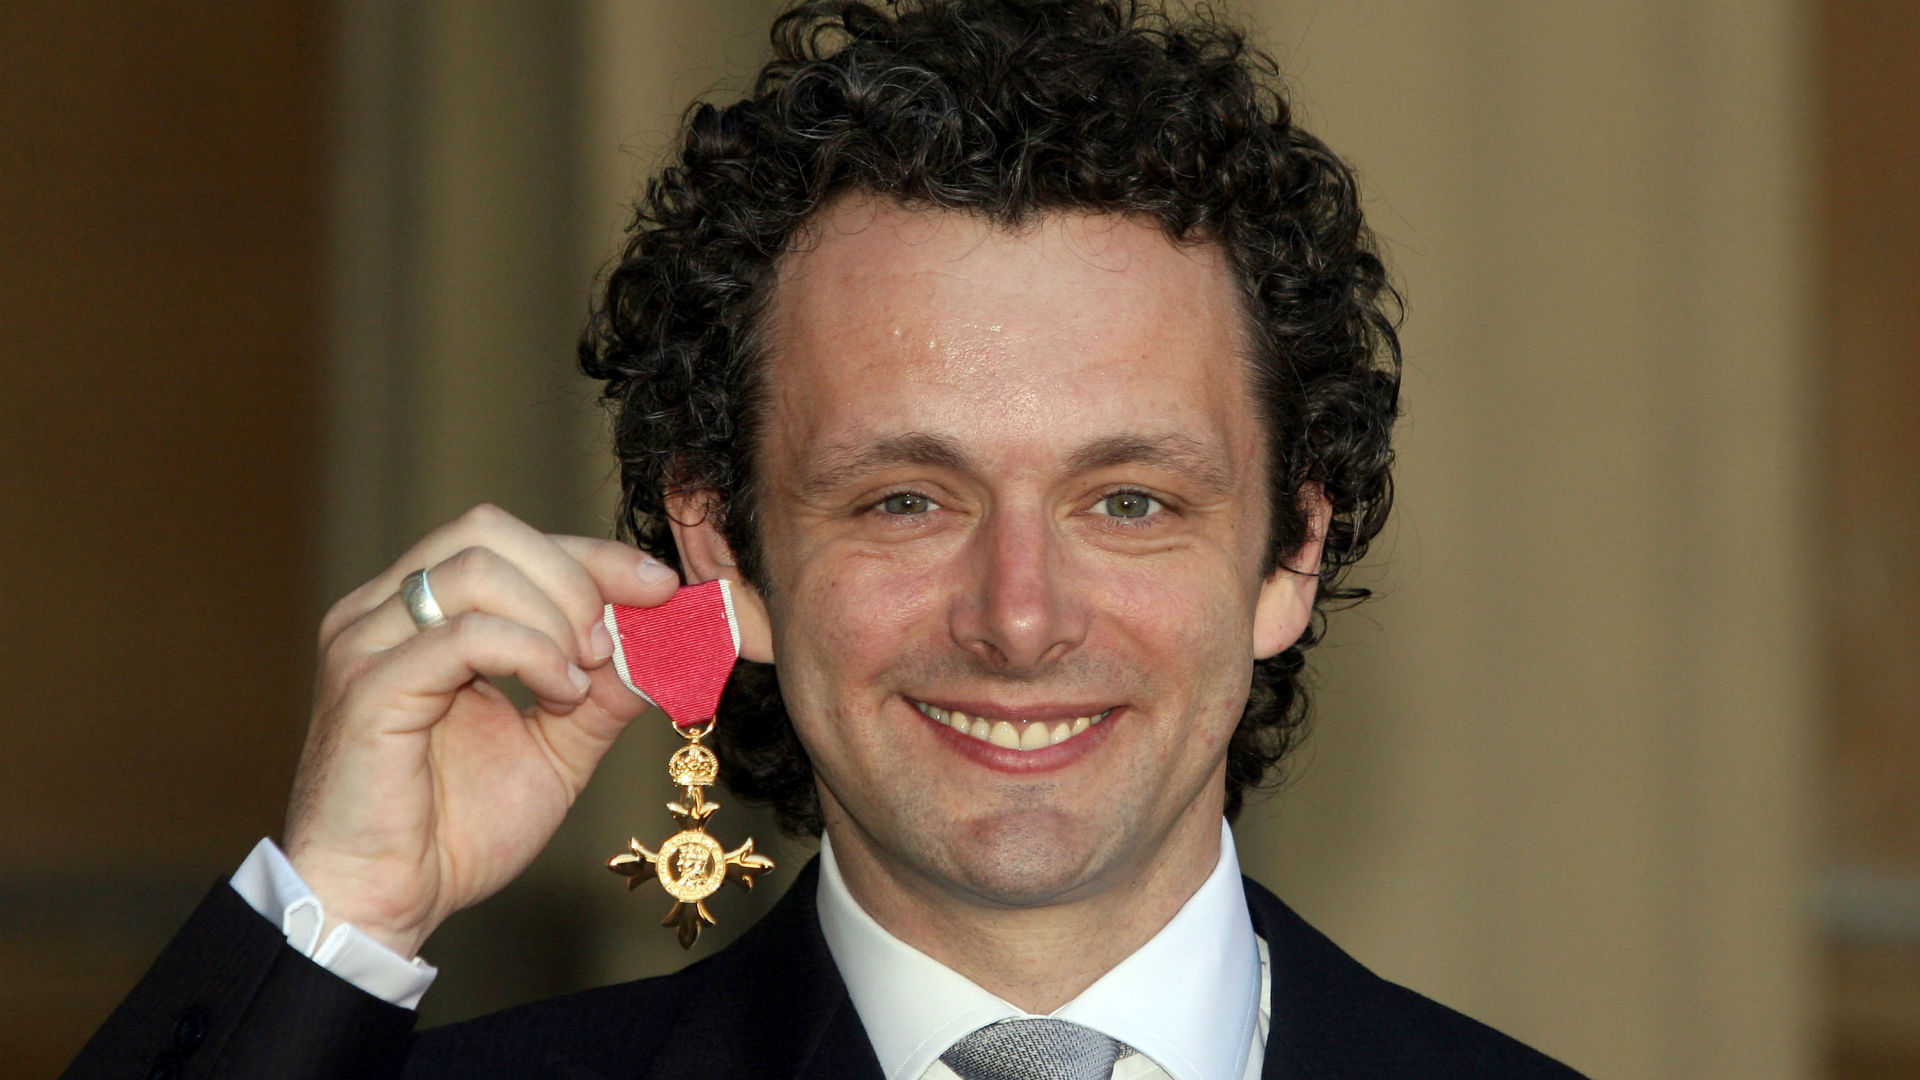 Michael Sheen Reveals He Returned His OBE to Avoid Feeling Like a 'Hypocrite'